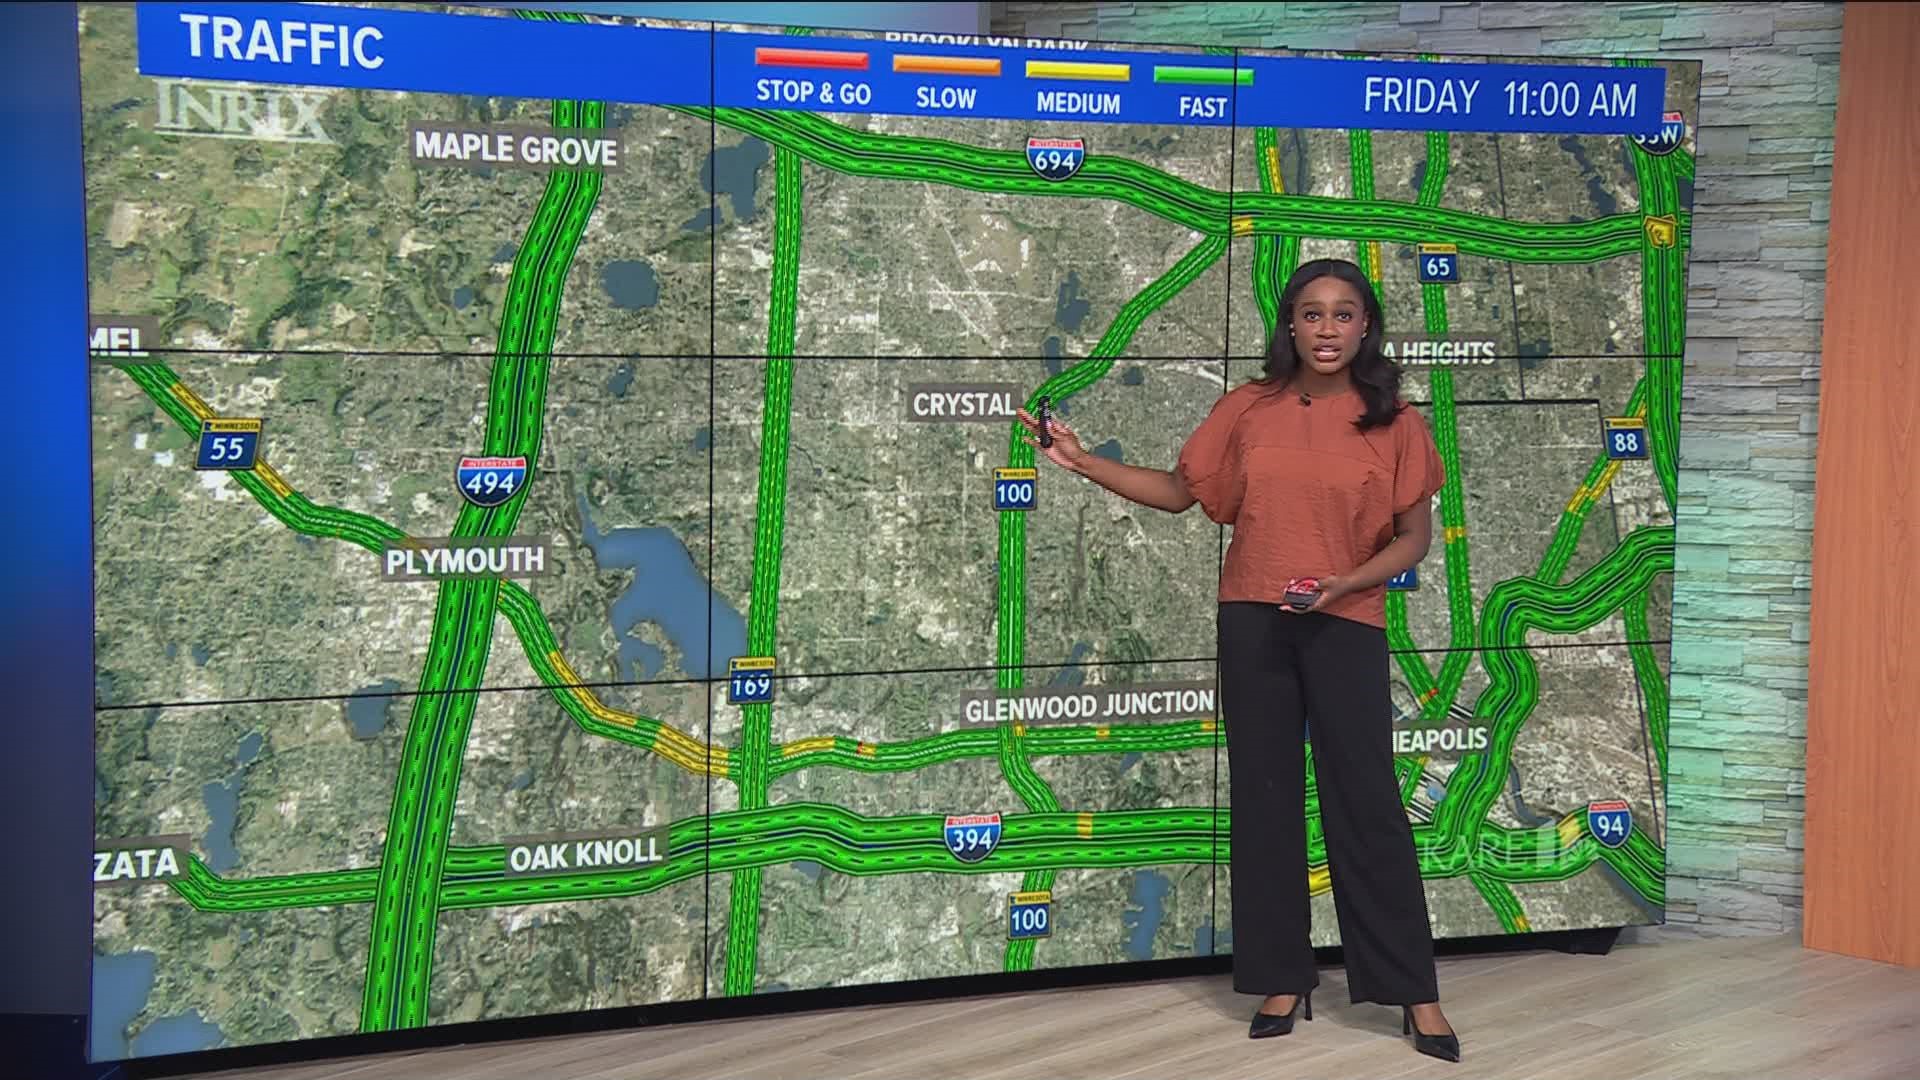 KARE 11's Cece Gaines has a rundown of major road projects going on this weekend that could throw a wrench in your plans.